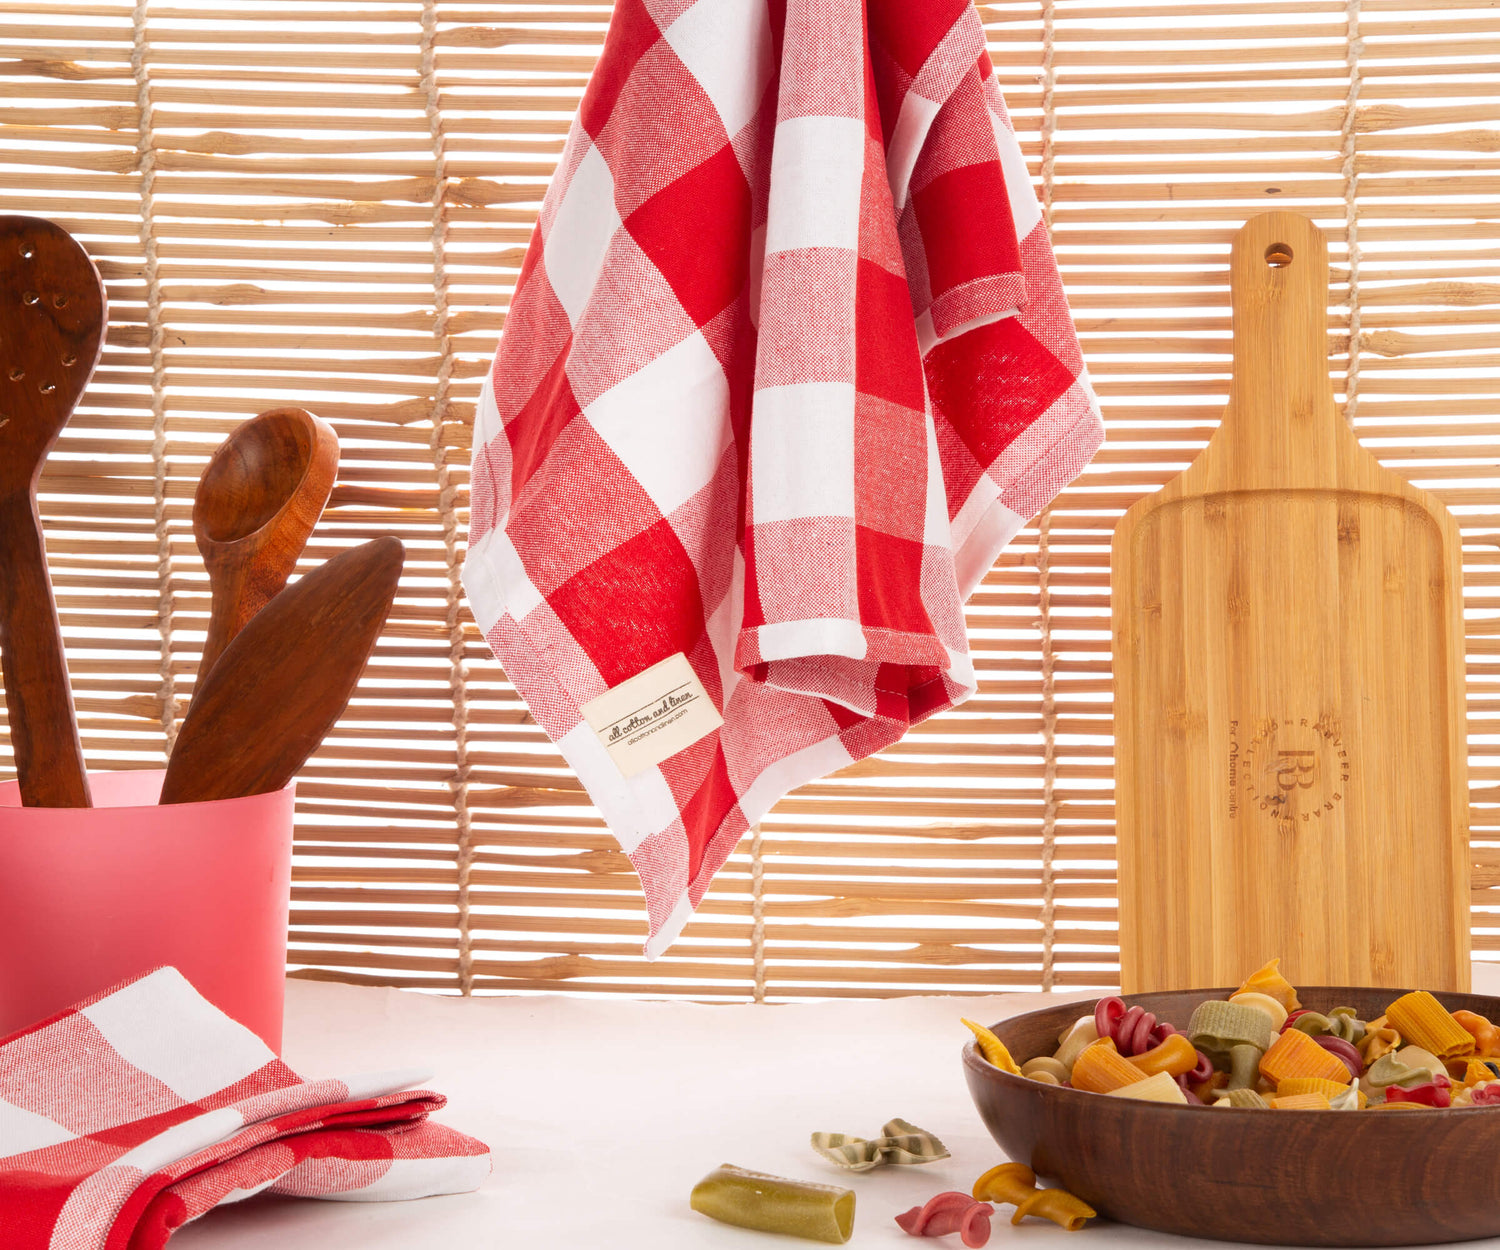 Hanging Kitchen Towel 5 - Stylish and Functional